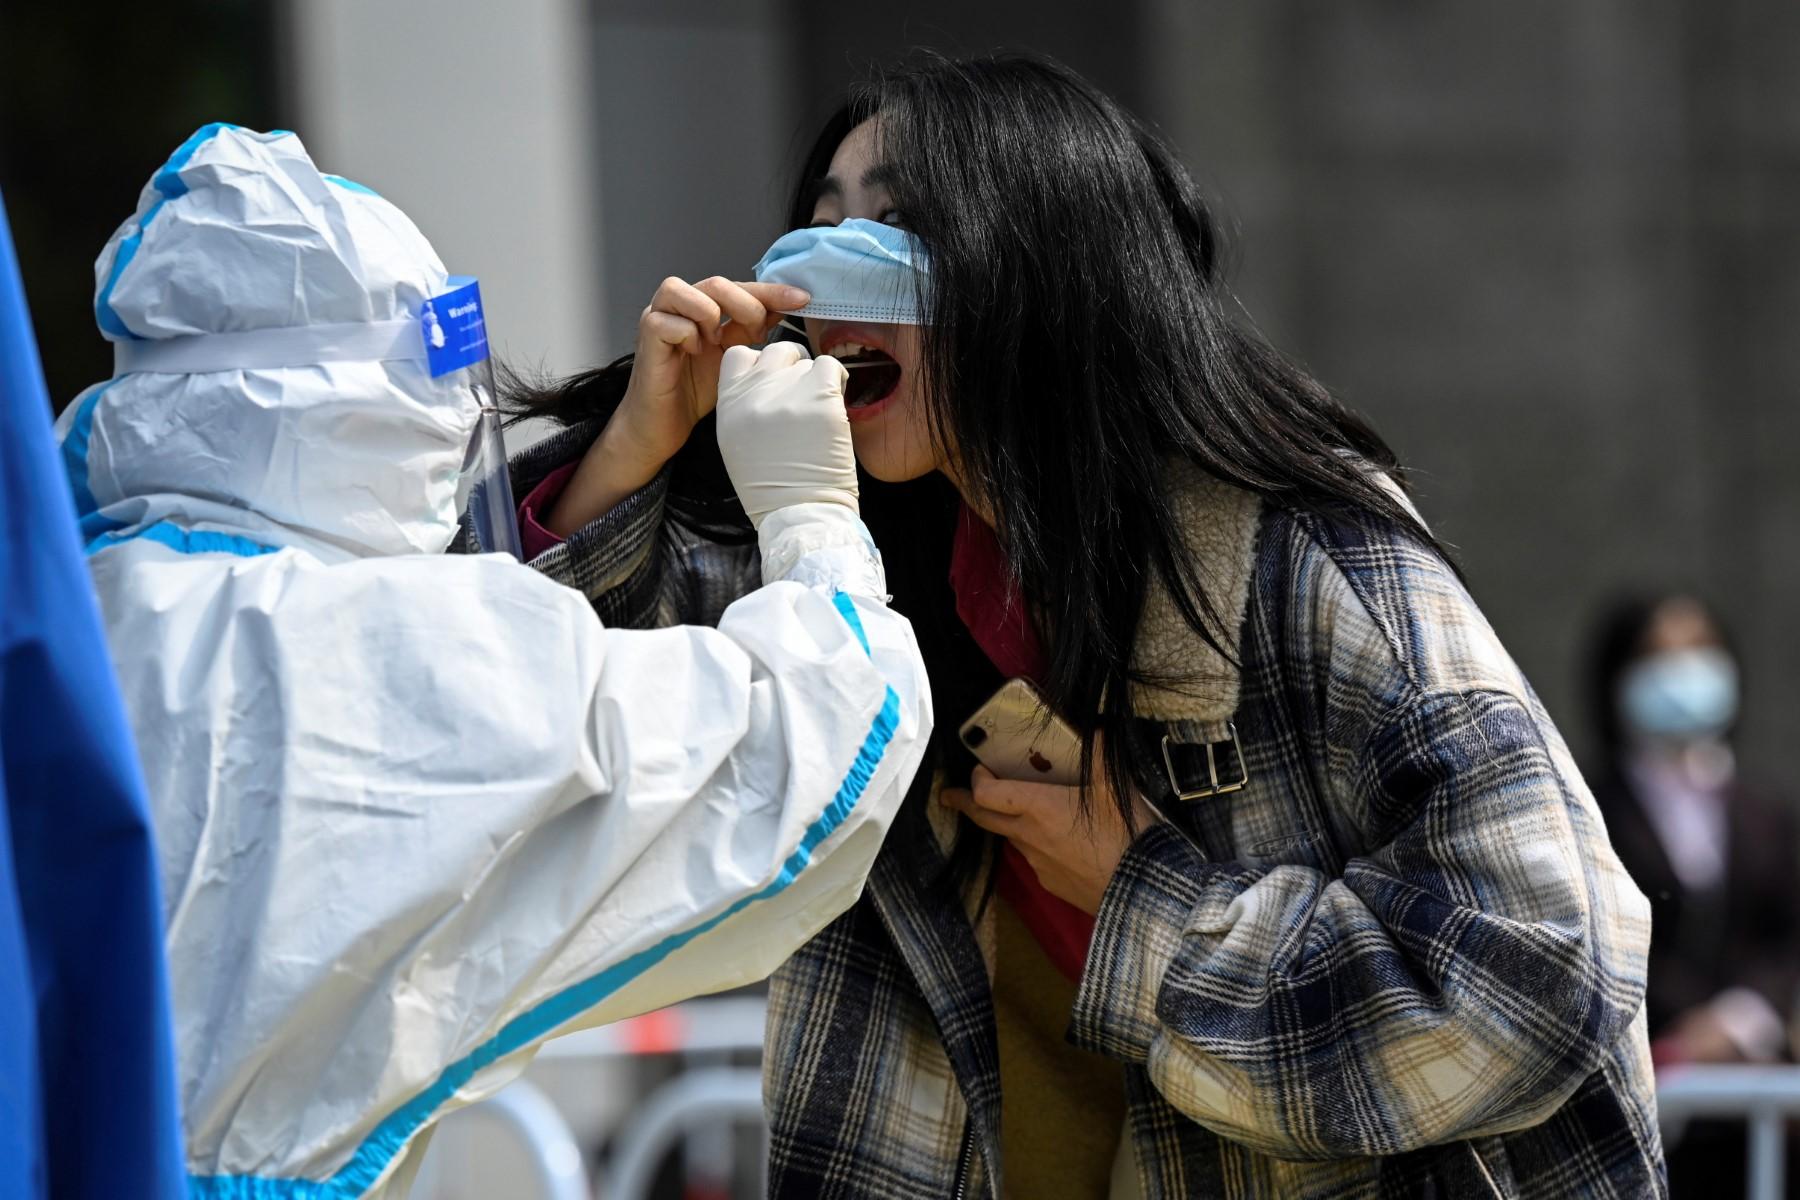 A health worker takes a swab sample from a woman at a Covid-19 coronavirus testing site outside office buildings in Beijing on April 29. Photo: AFP